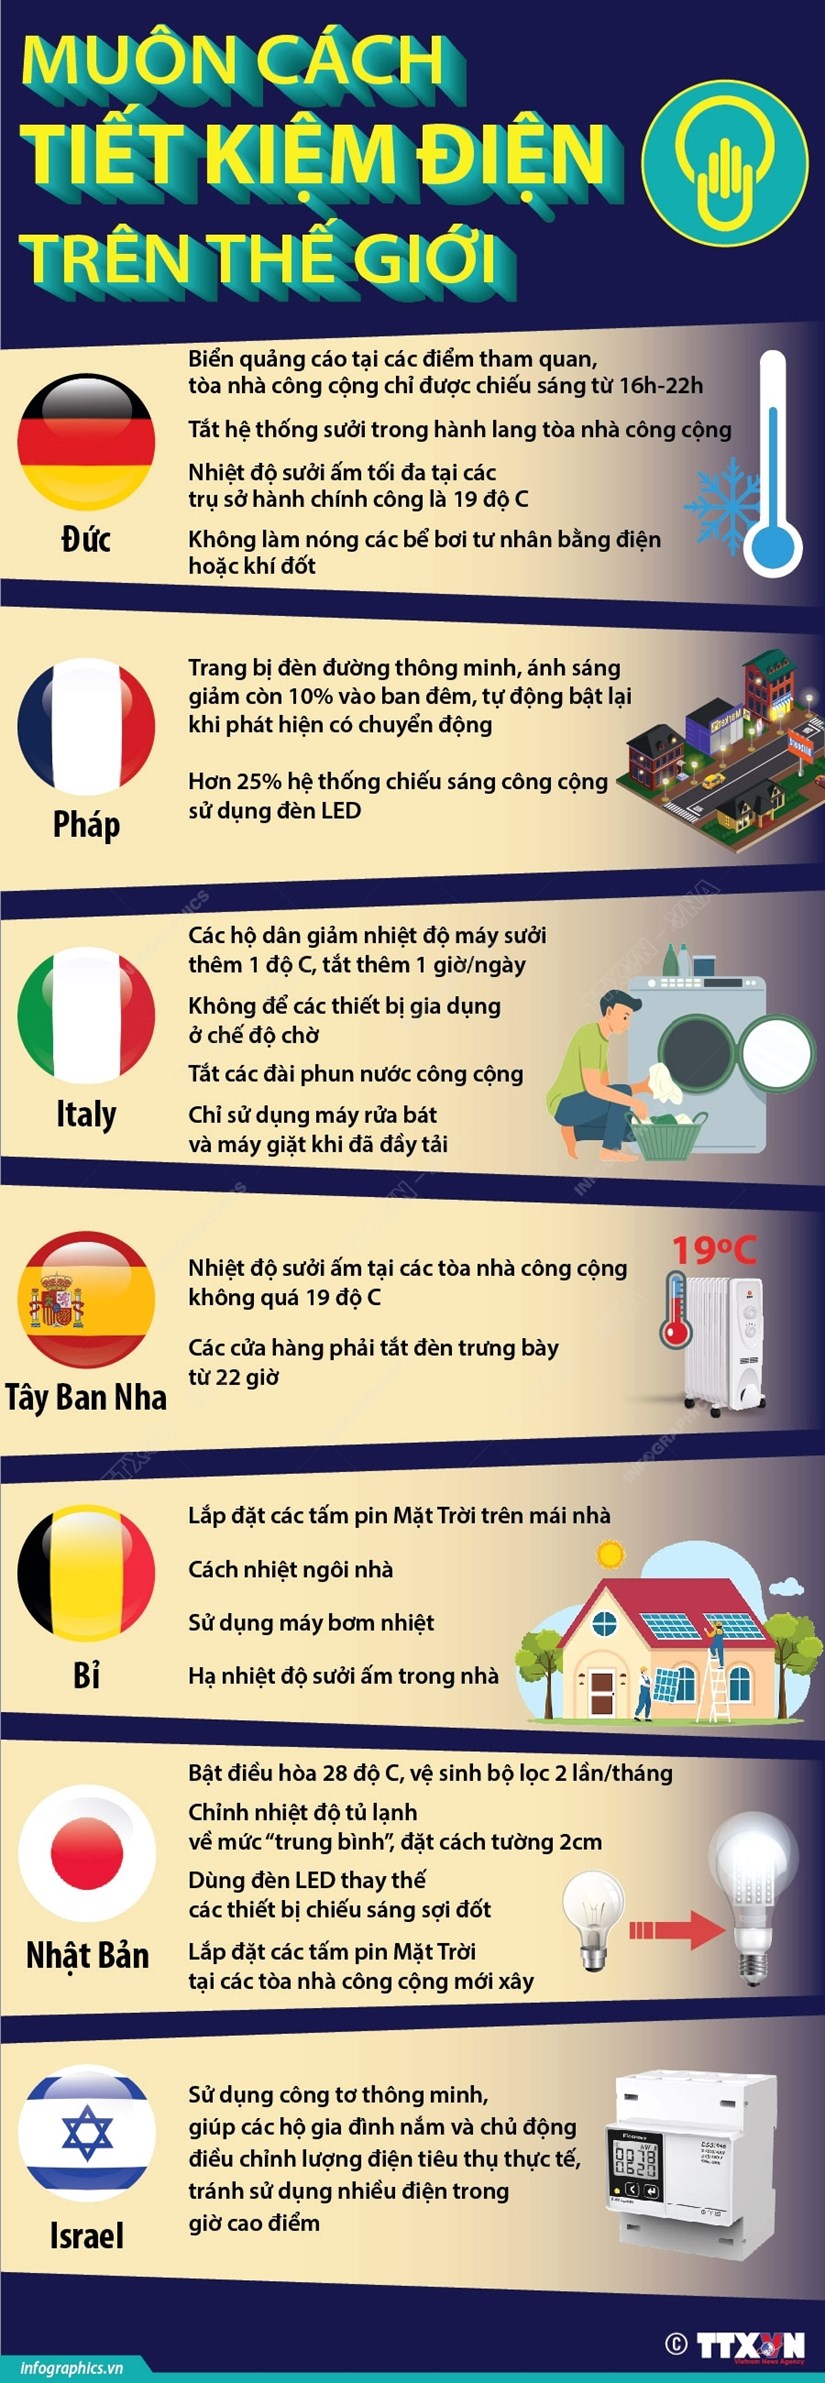 [Infographics] Cac quoc gia tren the gioi tiet kiem dien nhu the nao? hinh anh 1